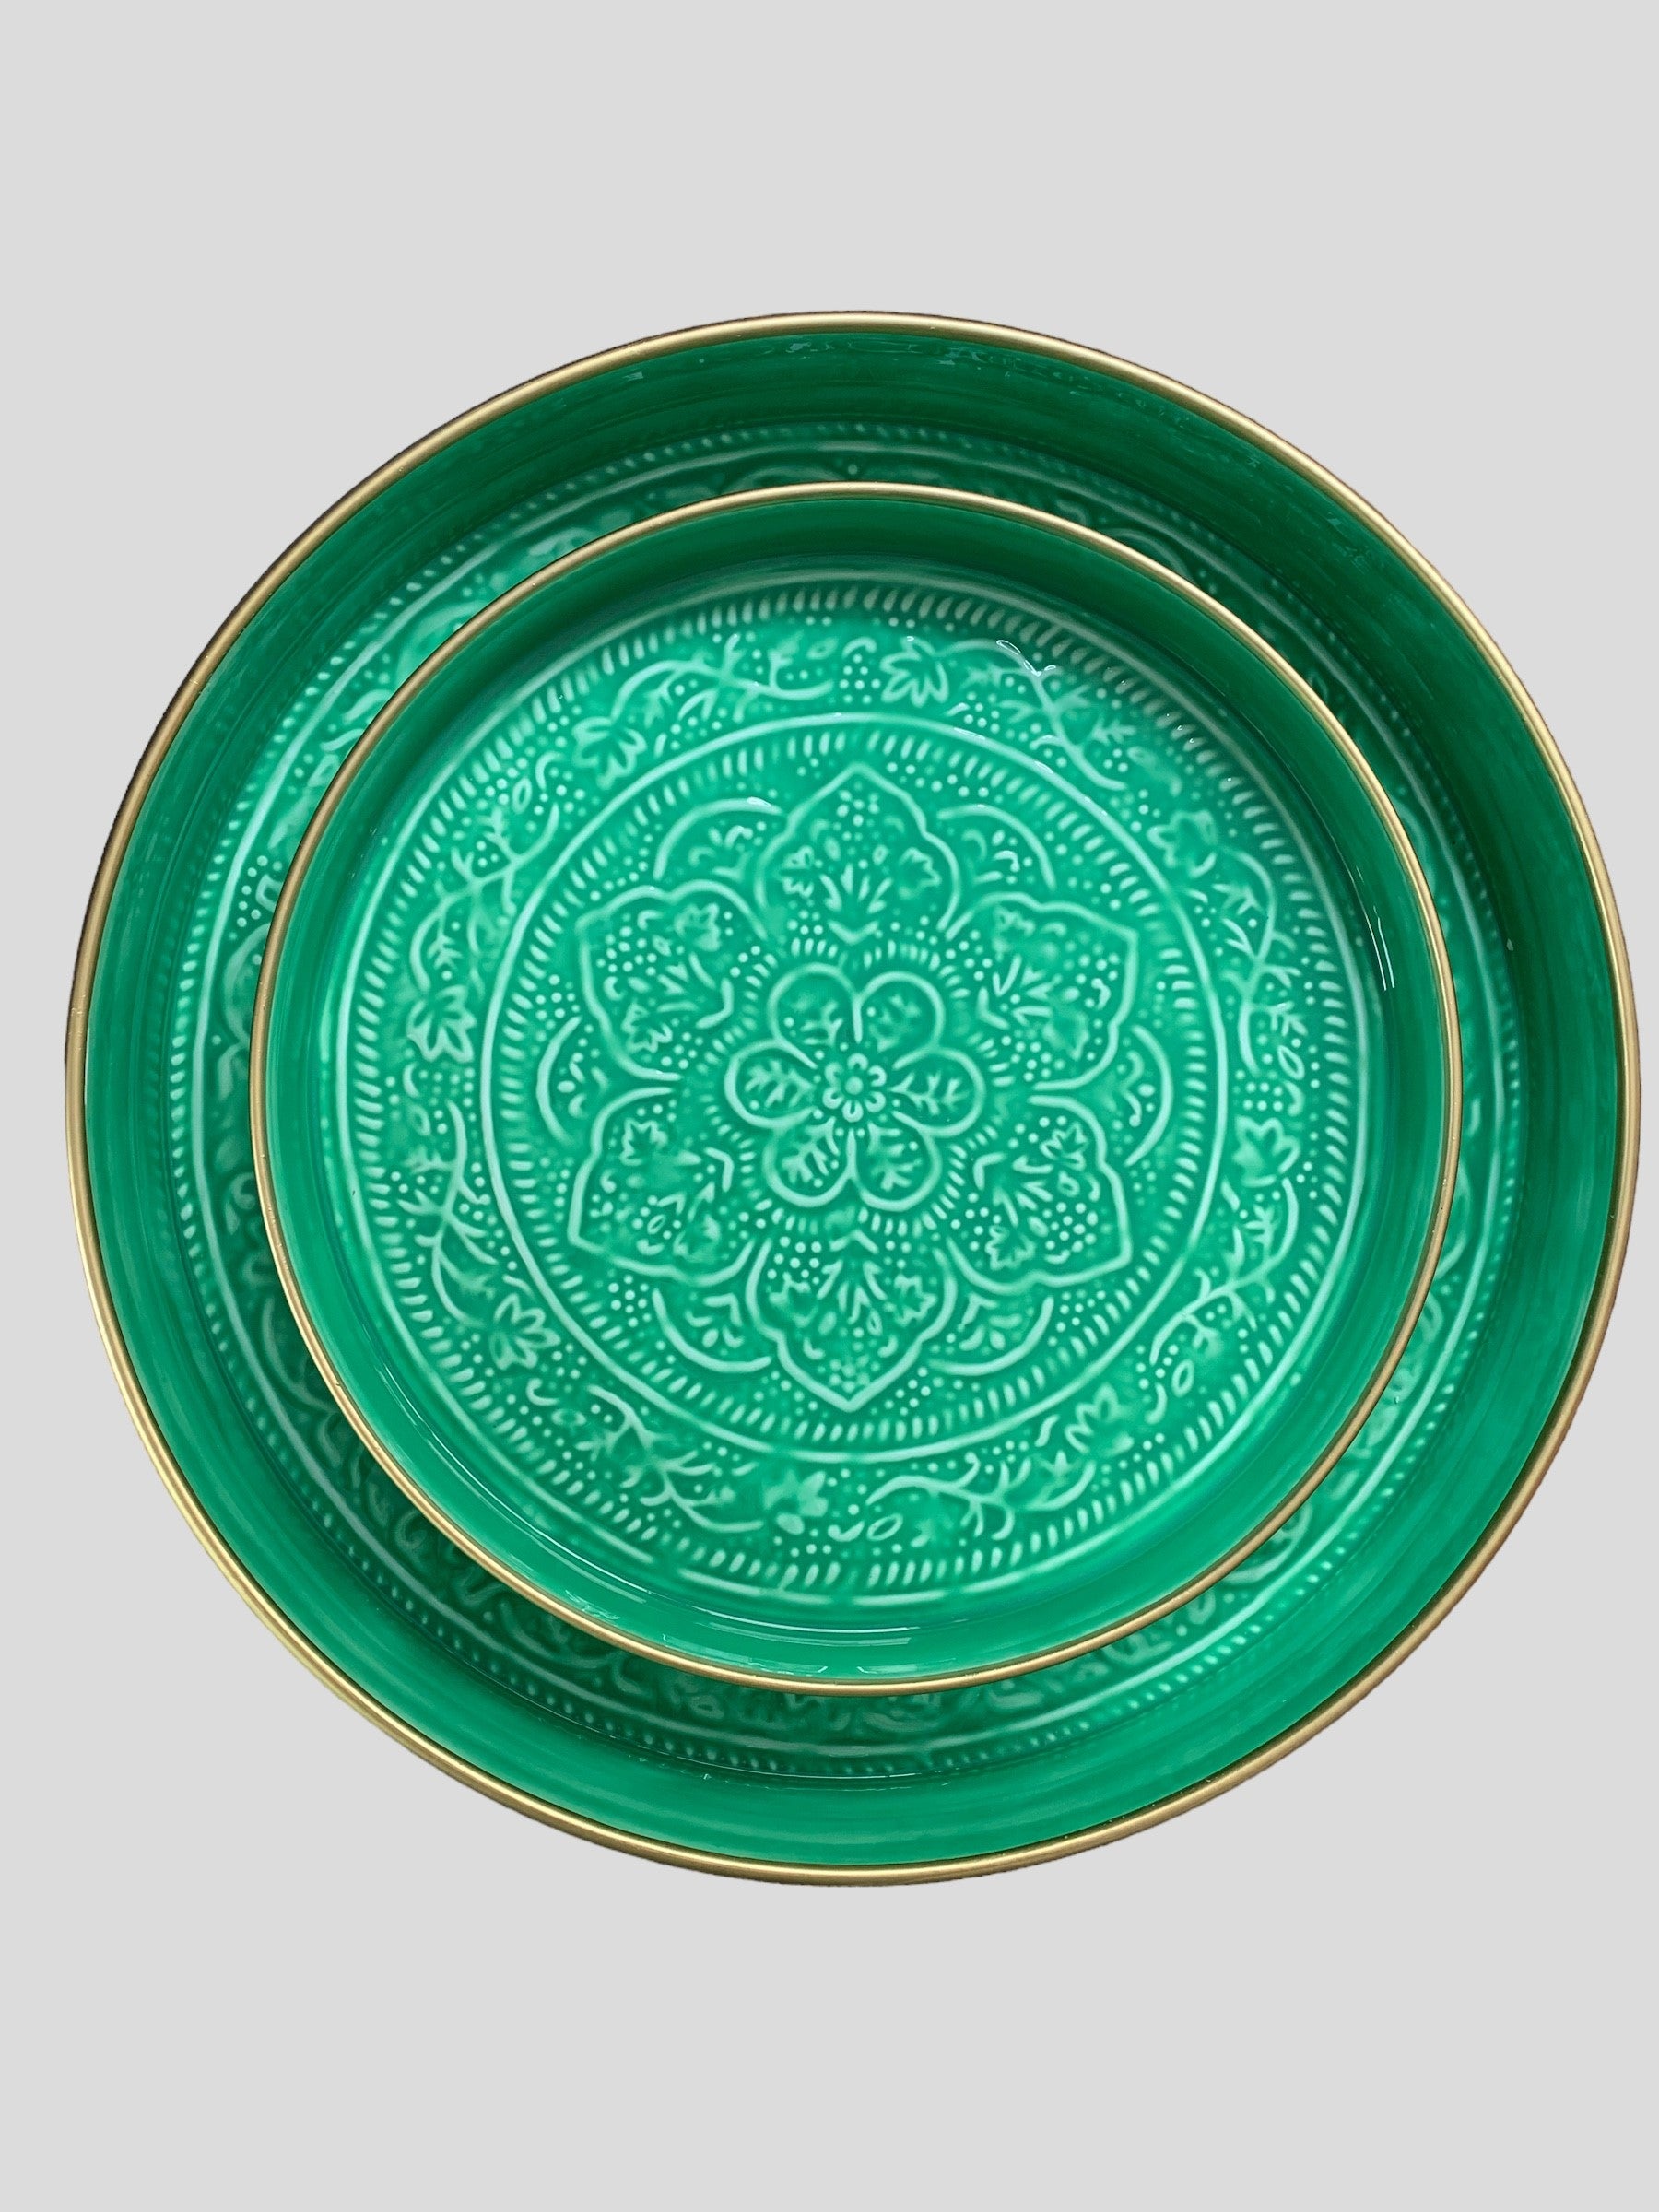 A medium sized bright green enamel tray sitting inside a larger green enamel tray.  The trays have been embossed with a floral pattern.